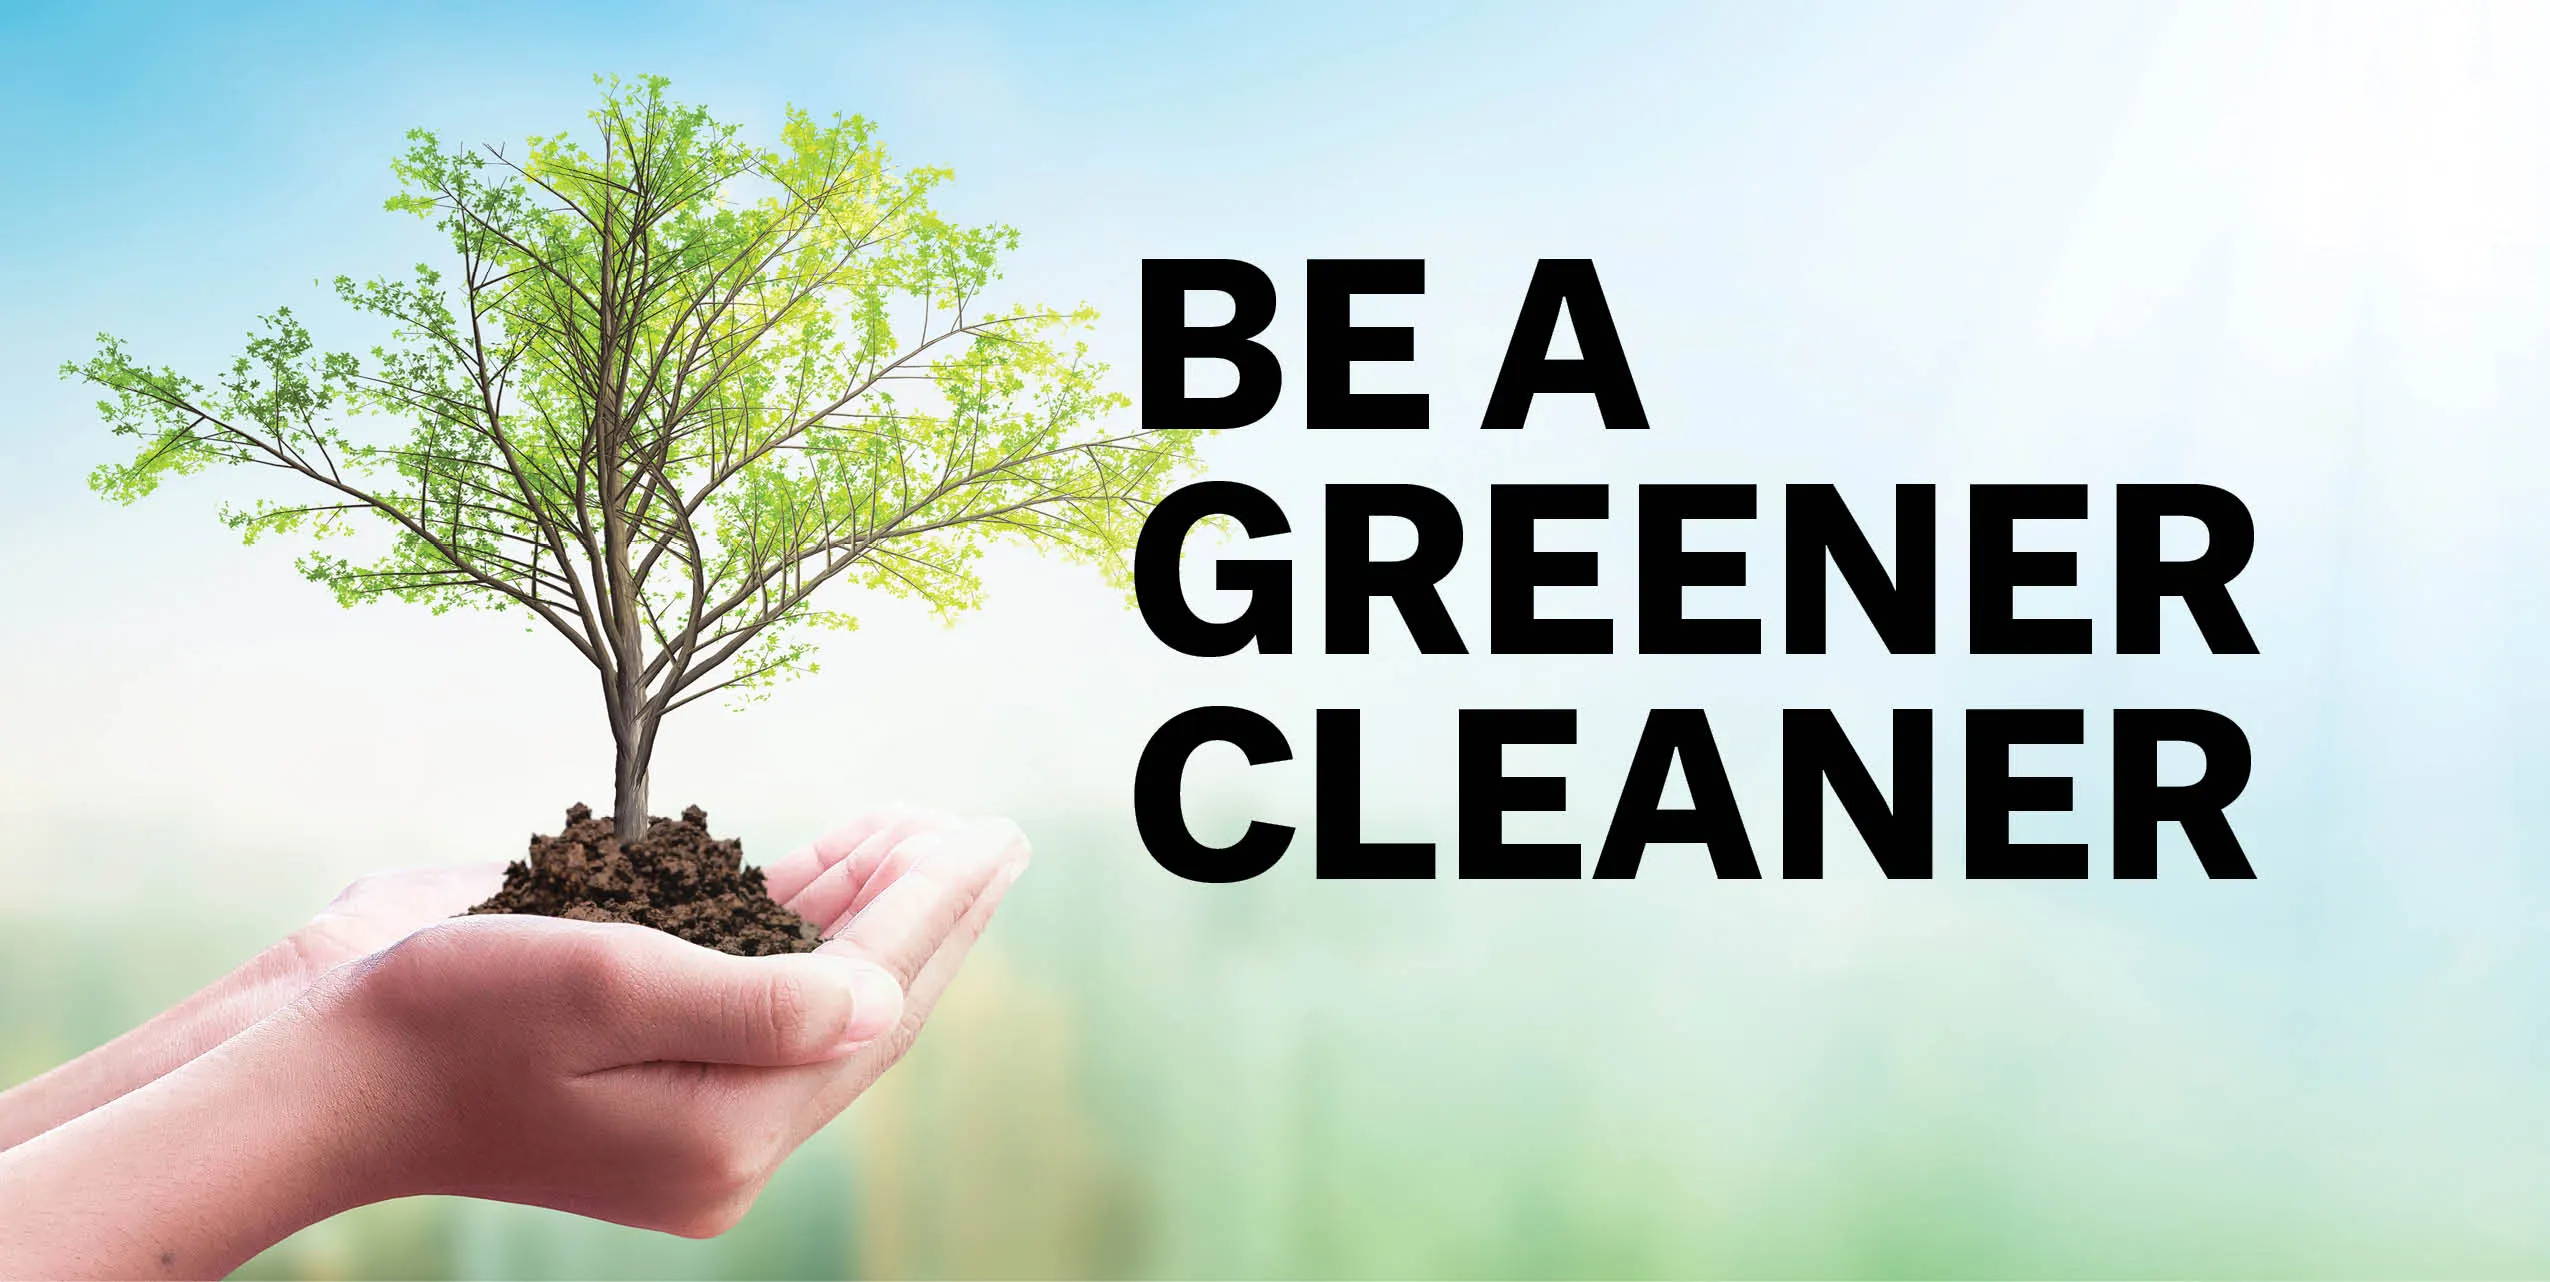 Be a Greener Cleaner